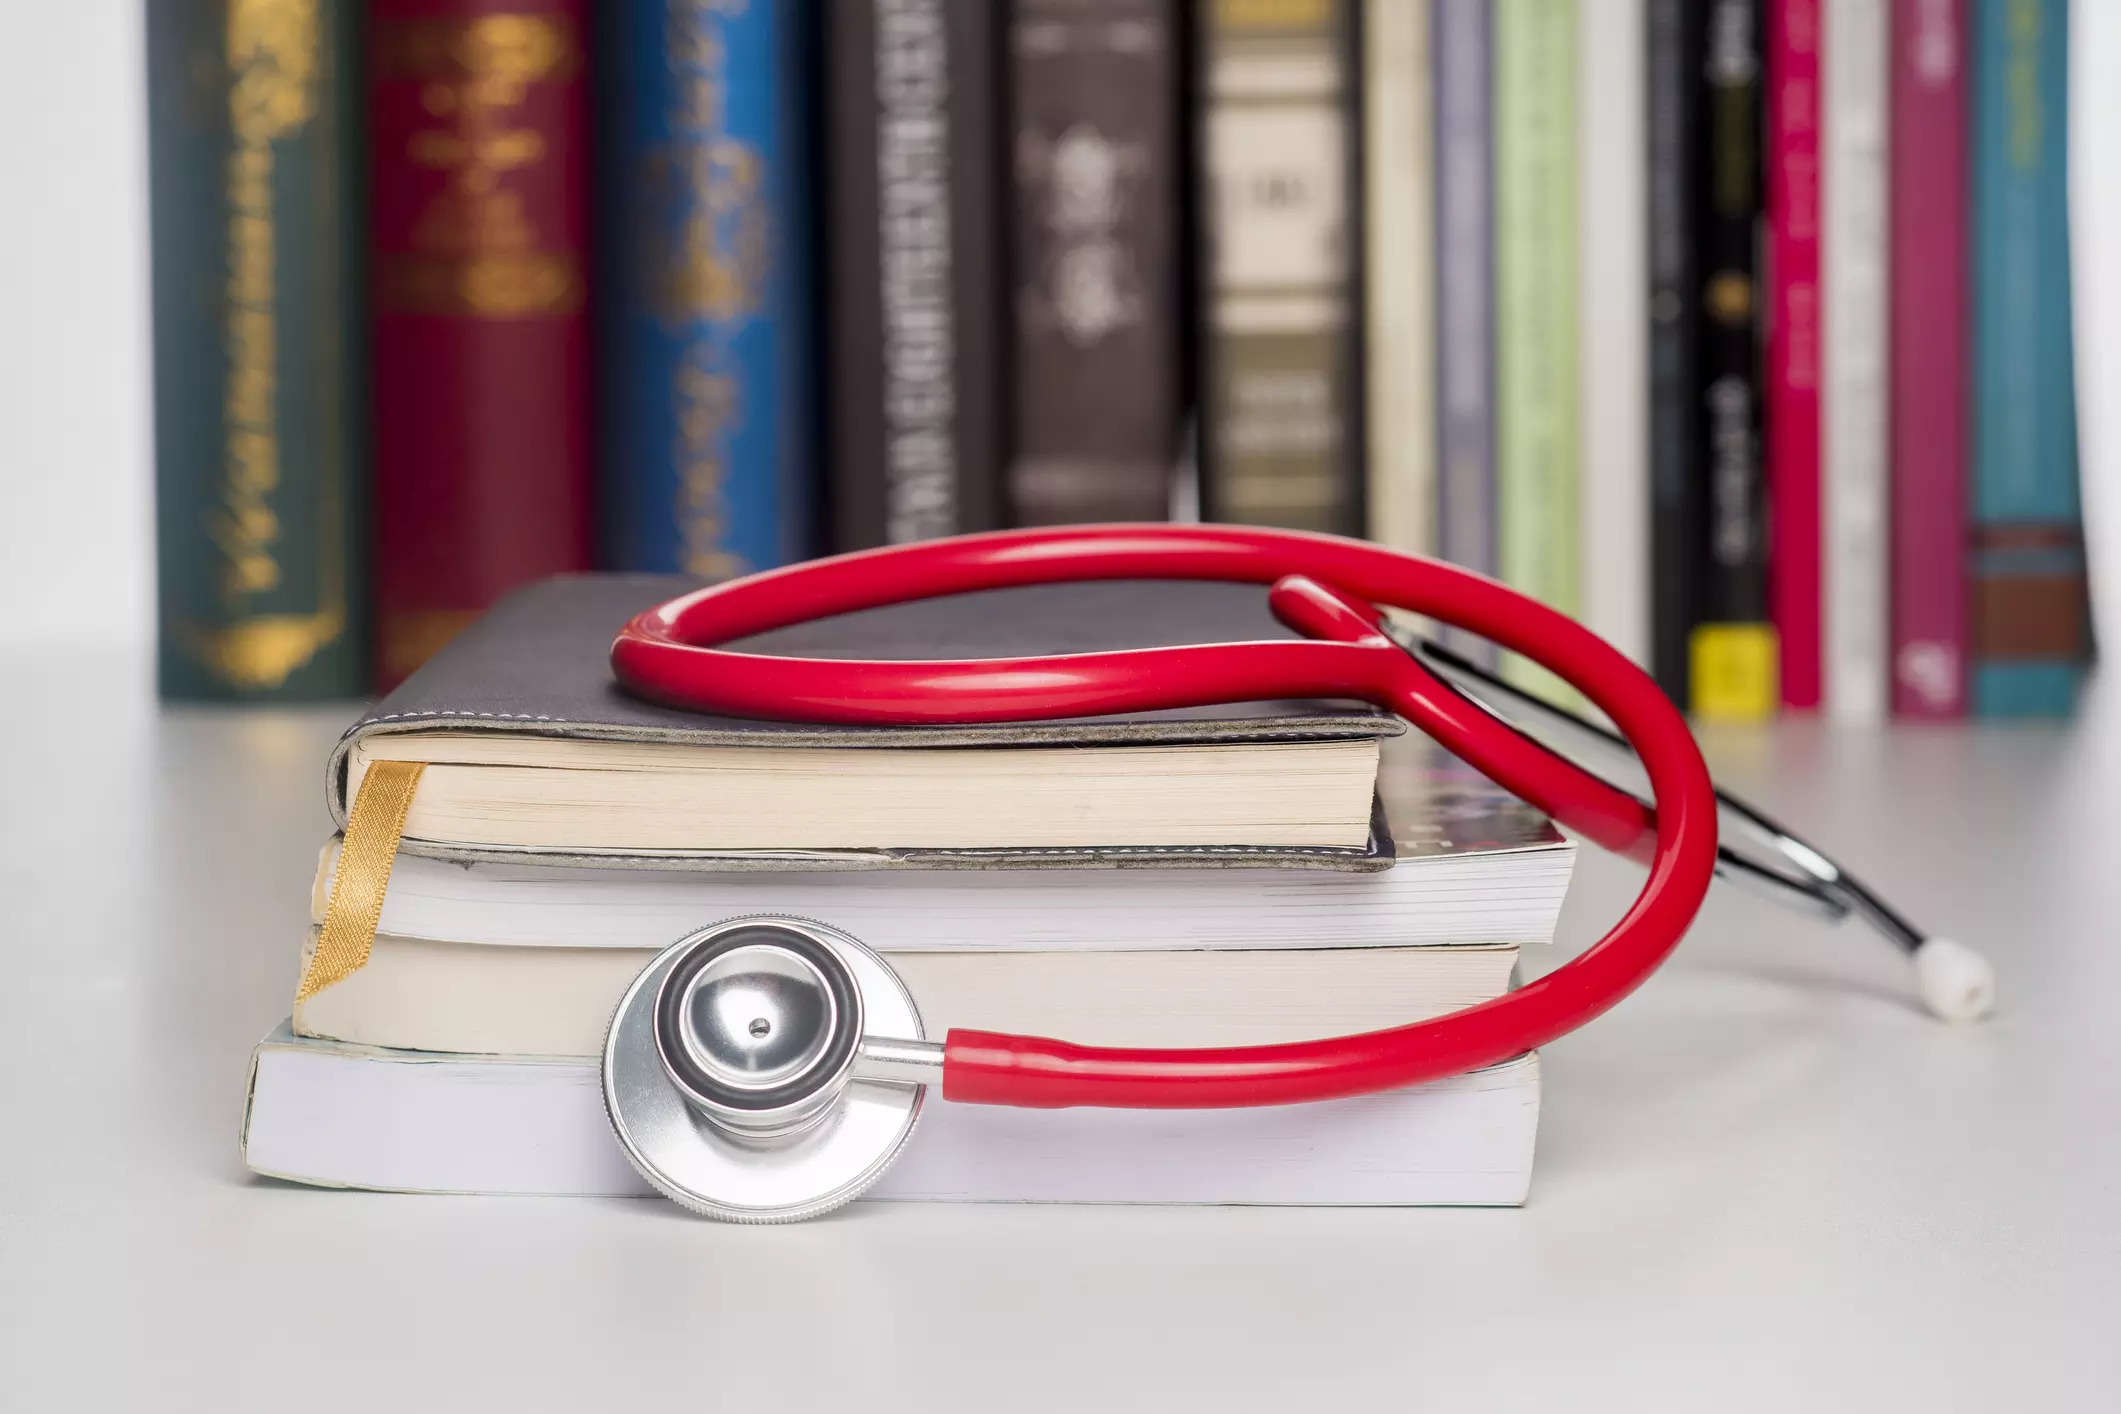 Medical courses